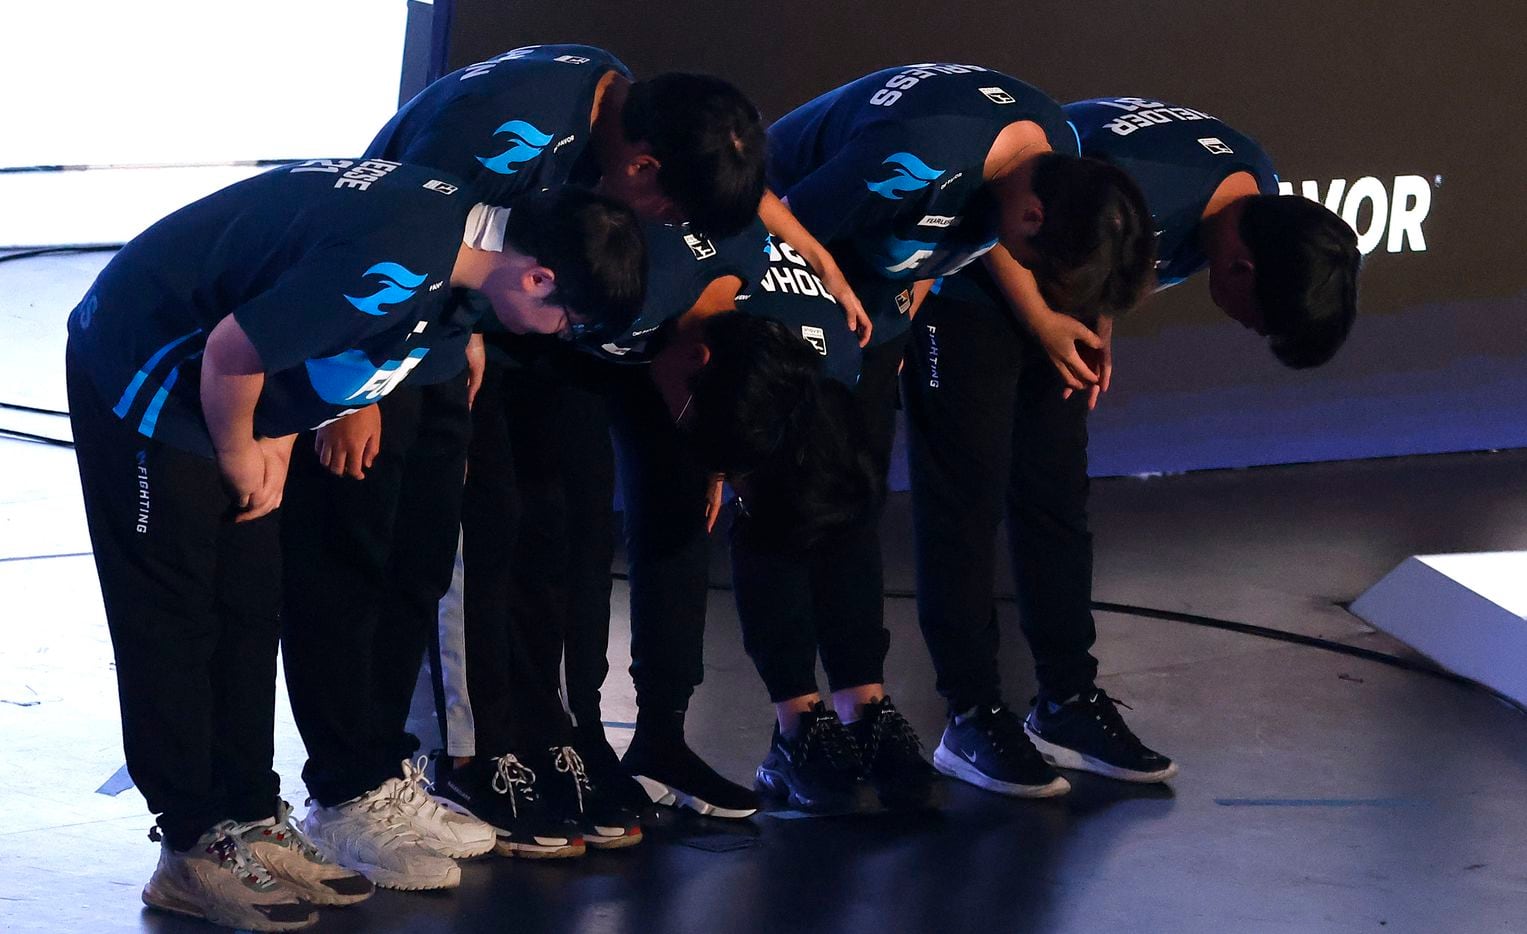 The Dallas Fuel team bows to their fans after defeating the Houston Outlaws in their Overwatch League match at Esports Stadium Arlington Friday, July 9, 2021. The Fuel defeated Houston in The Battle for Texas, 3-0. It was the first in-person live competition for fans in over a year. Houston competed from their hometown. (Tom Fox/The Dallas Morning News)